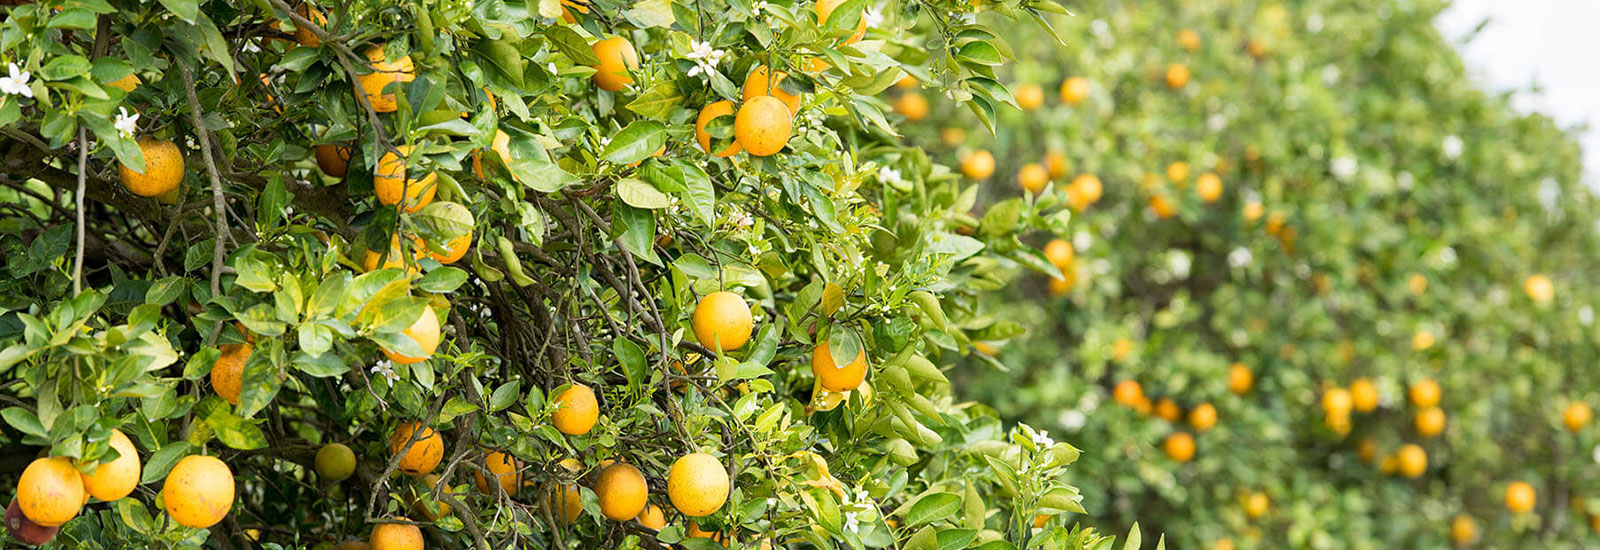 Development and Commercialization of Improved New Disease Resistant Scions and Rootstocks – the Key For a Sustainable and Profitable Florida Citrus Industry